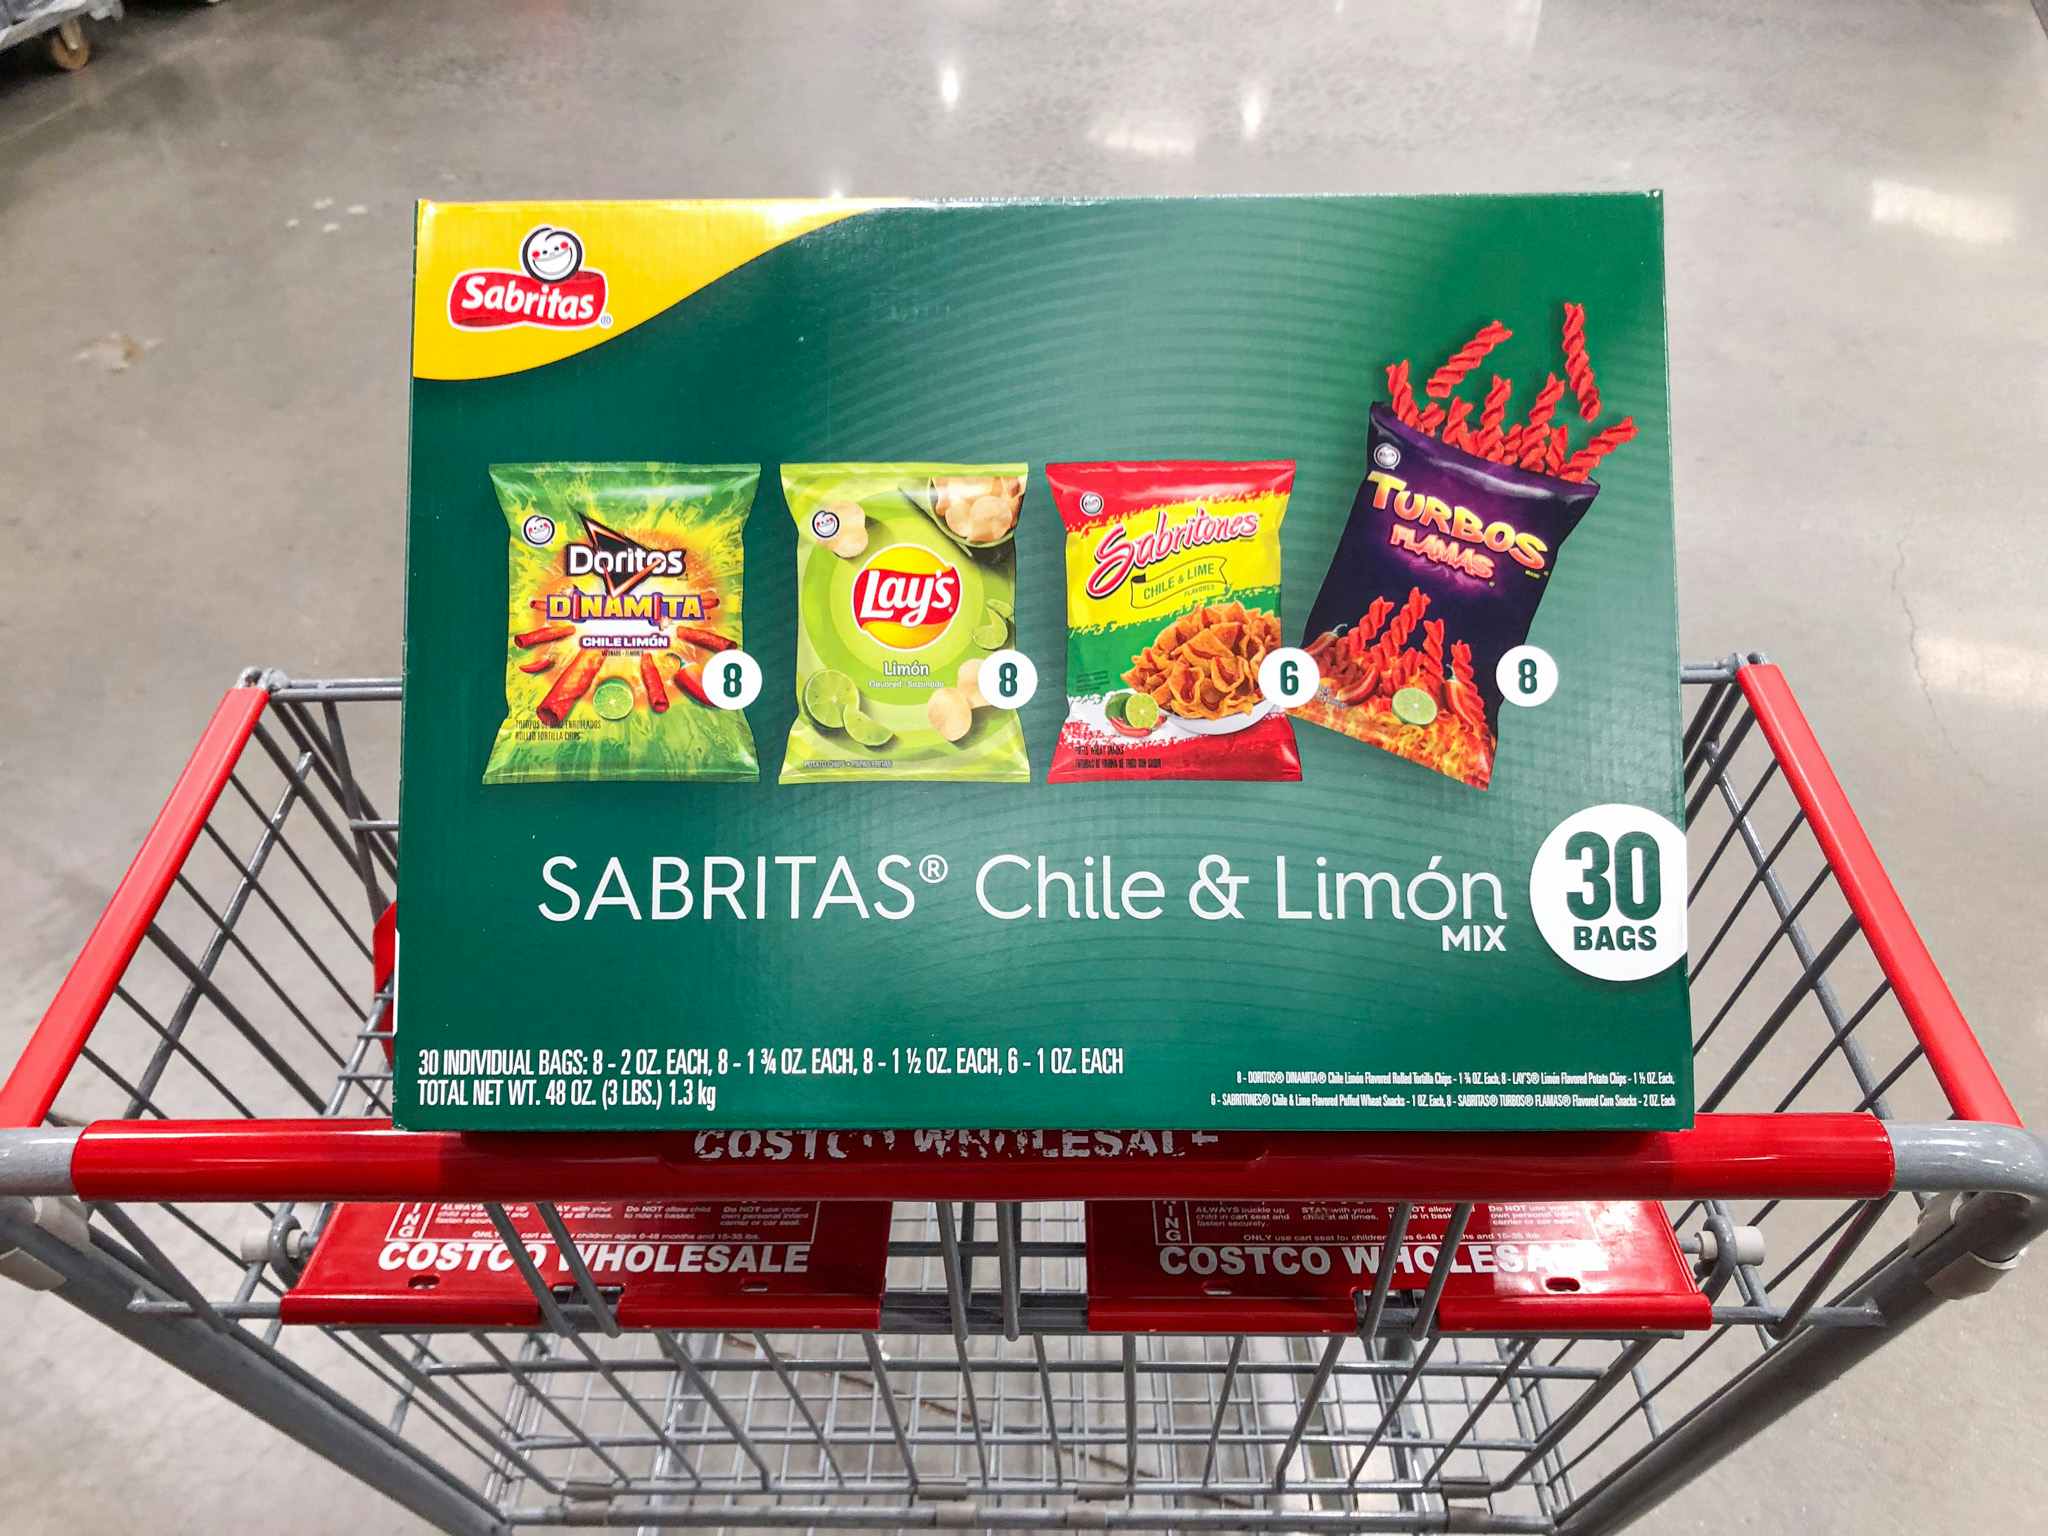 chili & limon variety pack of chips